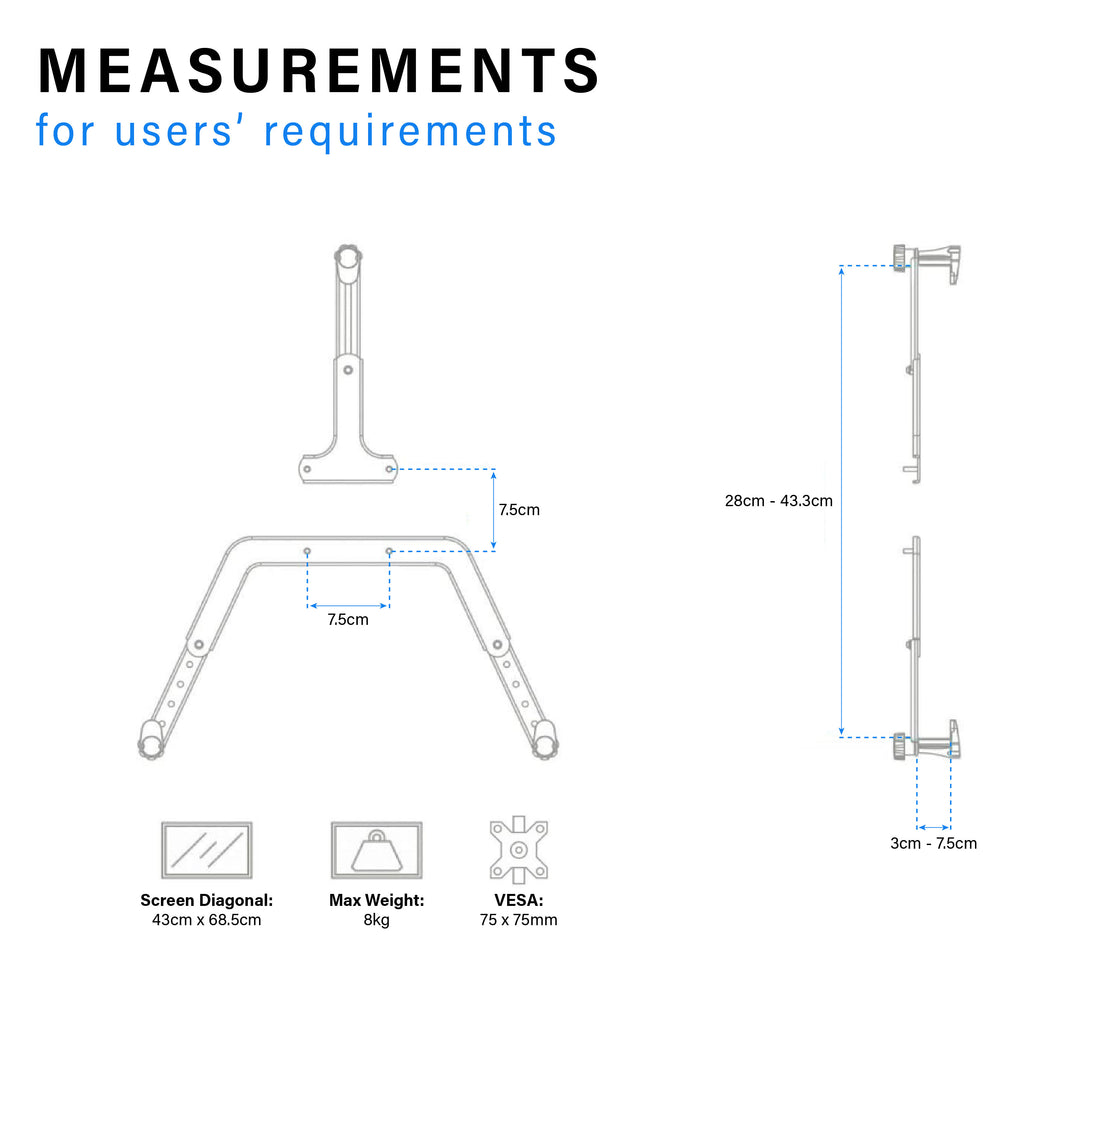 ULTi Mount Bracket VESA Adaptor for Non-VESA Monitor Arm, Mounting Kit for Screen Size of 17” to 27"